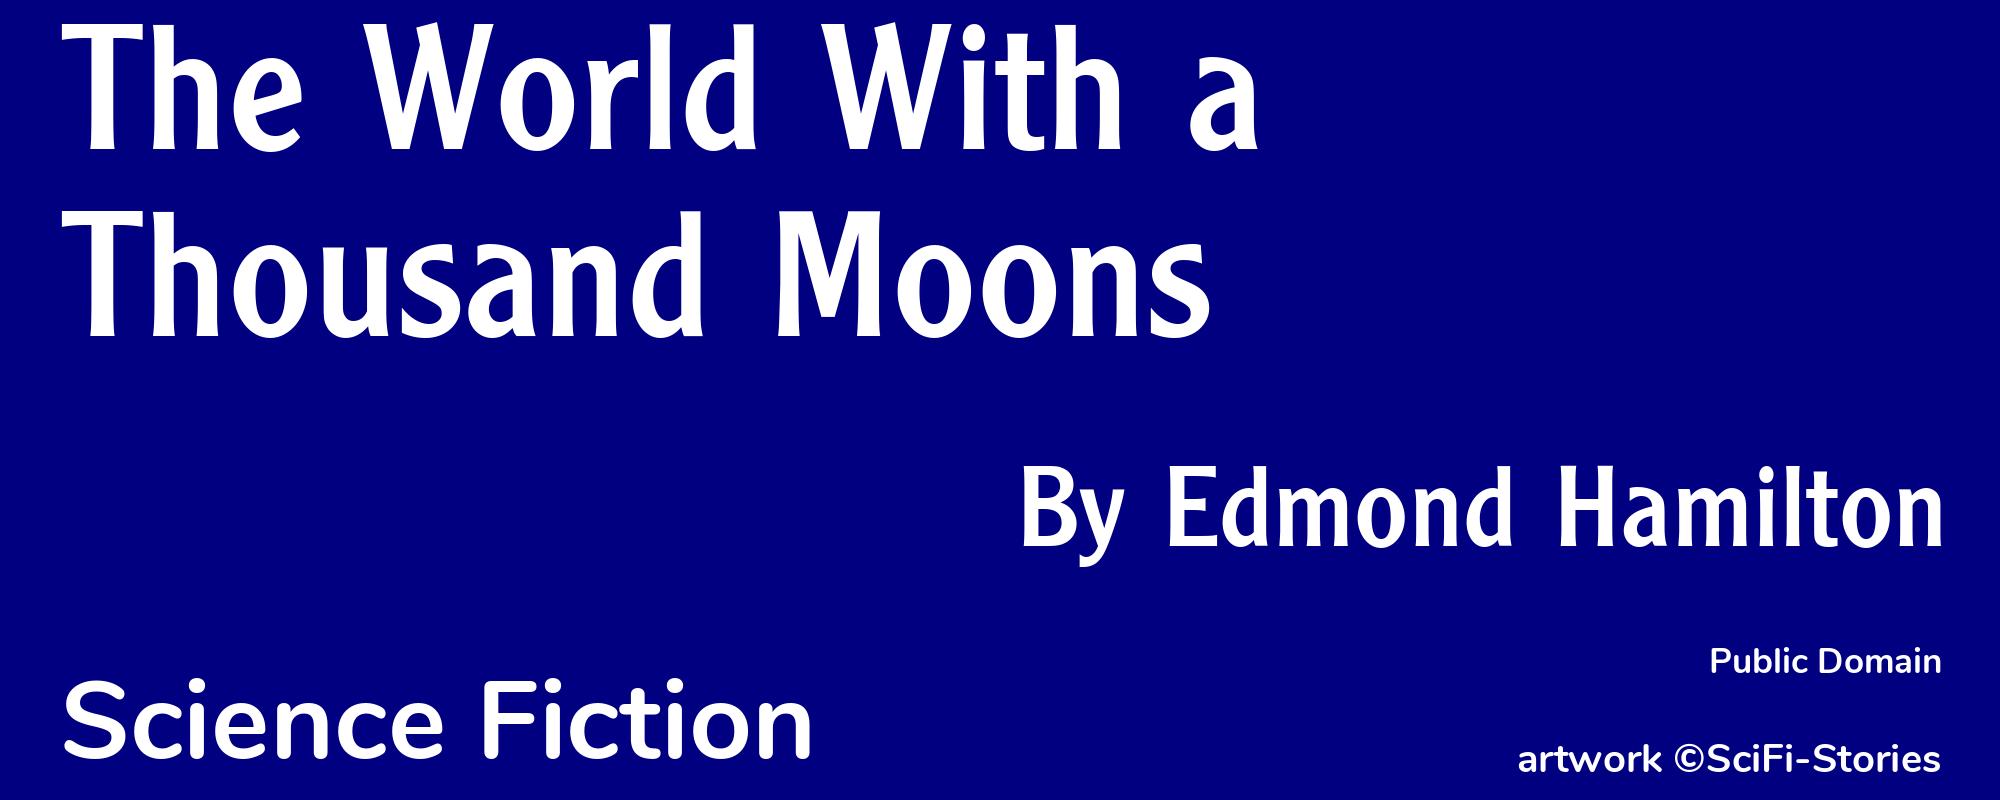 The World With a Thousand Moons - Cover